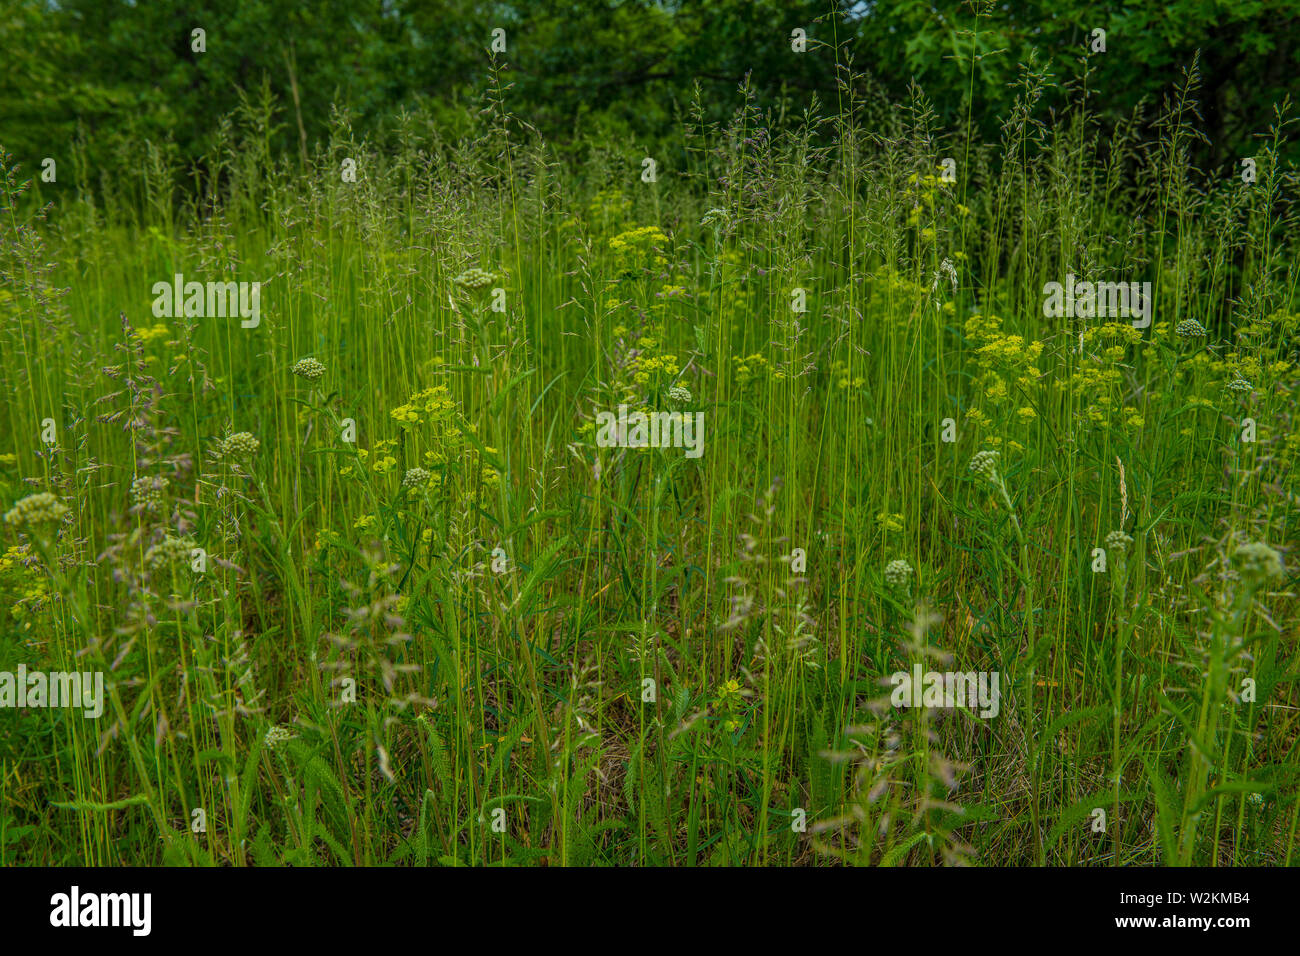 Tall grasses and wildflowers growing in late spring with the woodlands in the background at the midwest prairie Stock Photo